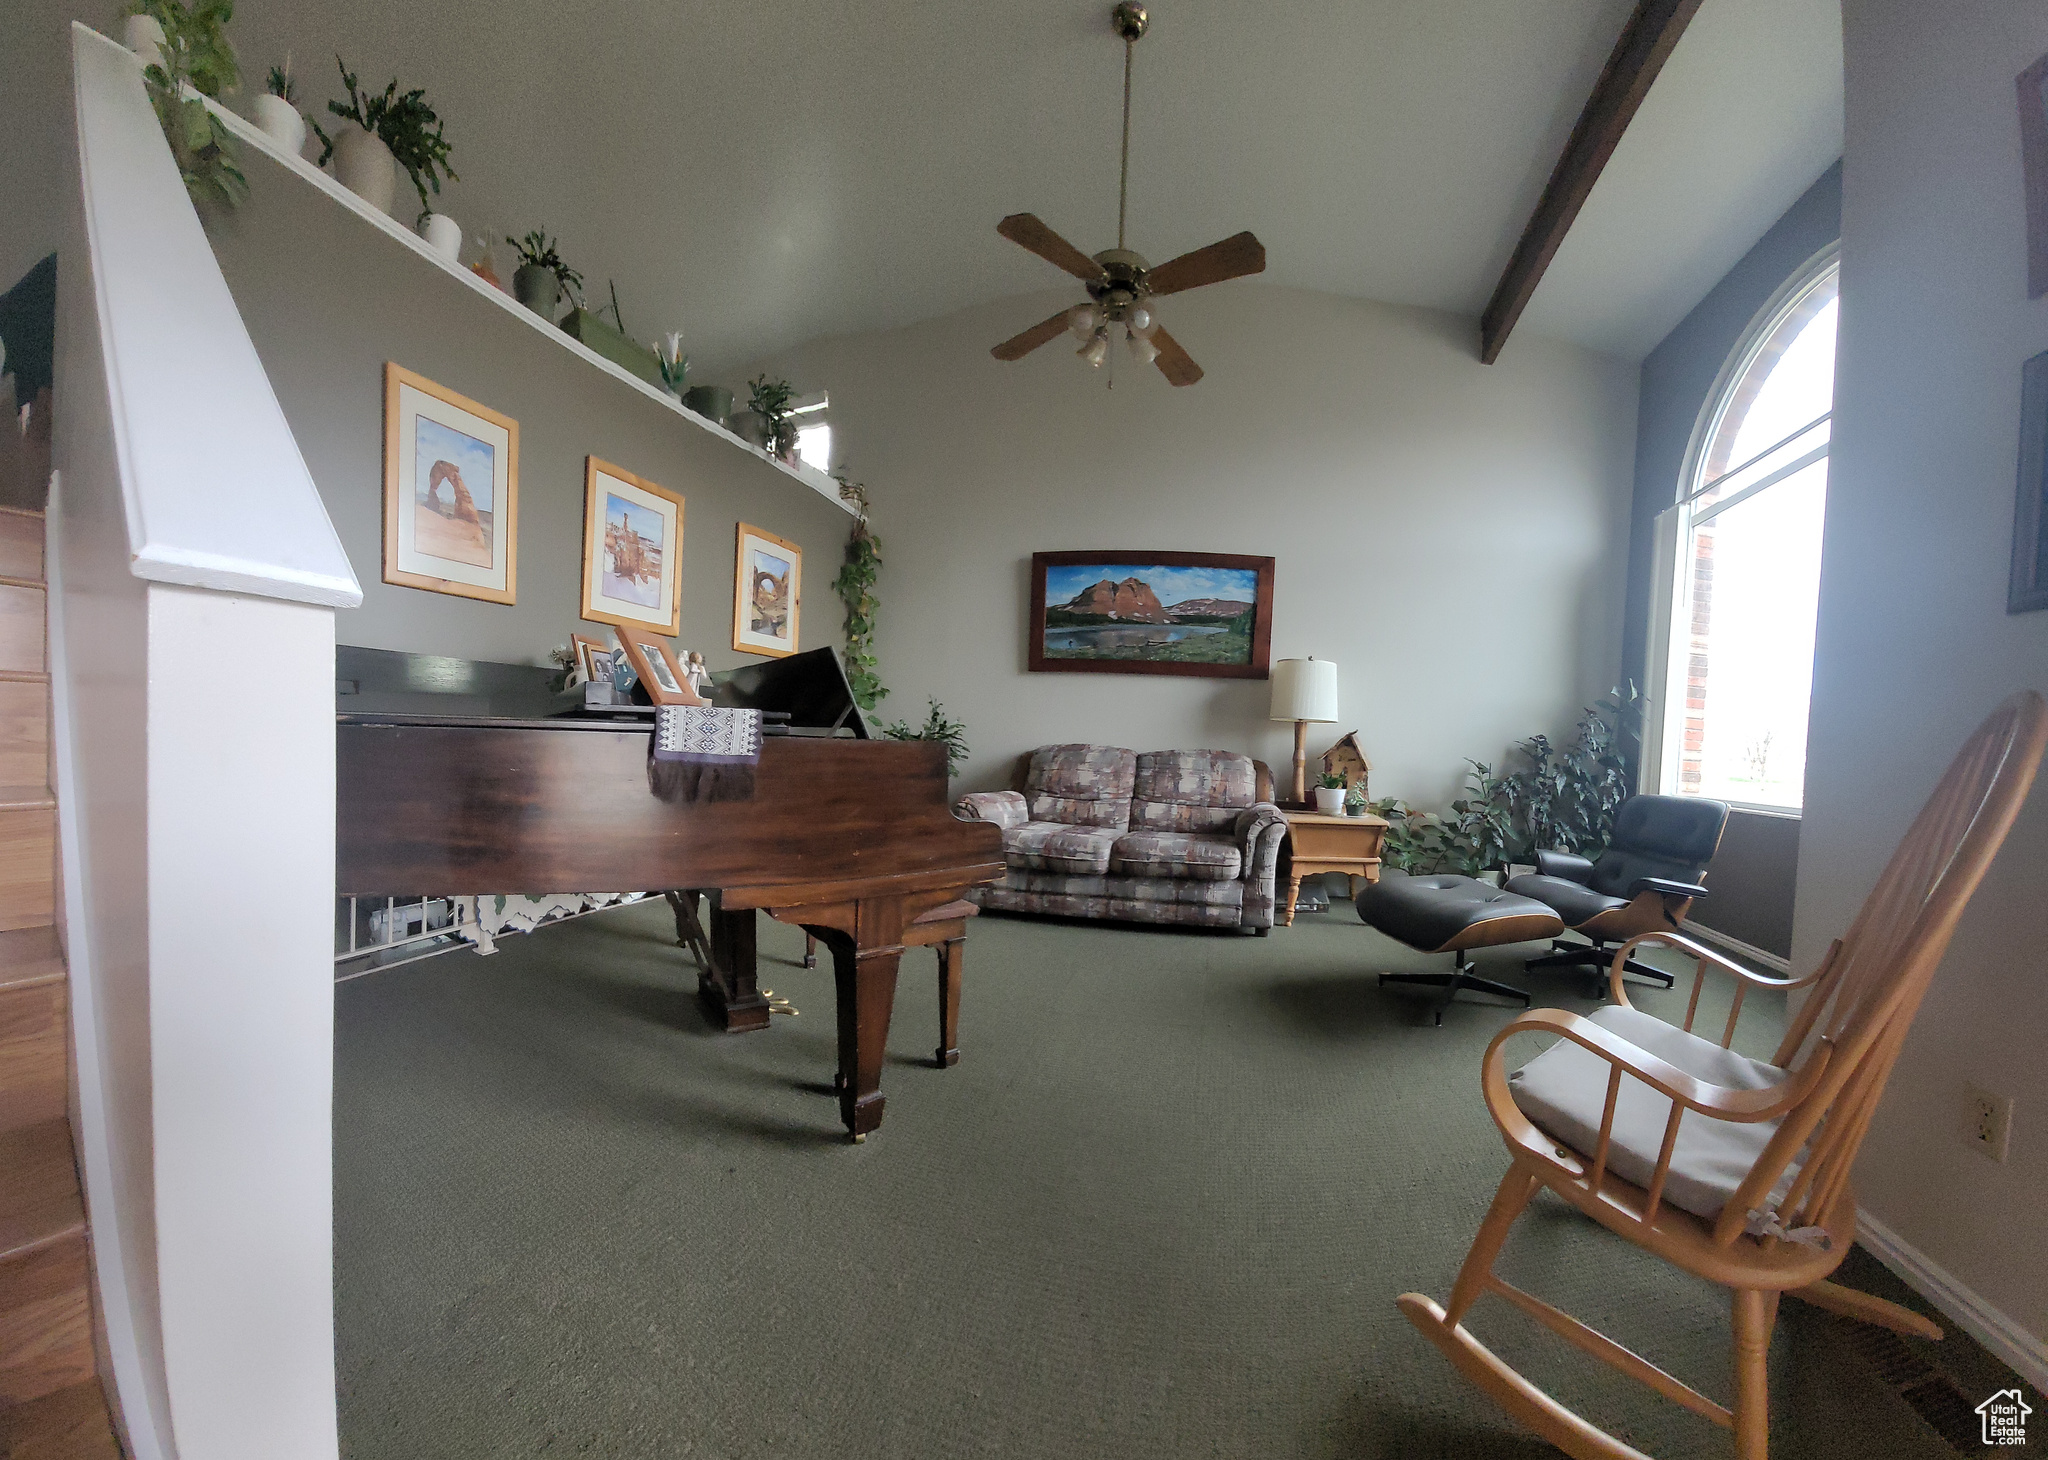 Office area with vaulted ceiling with beams, ceiling fan, and carpet floors